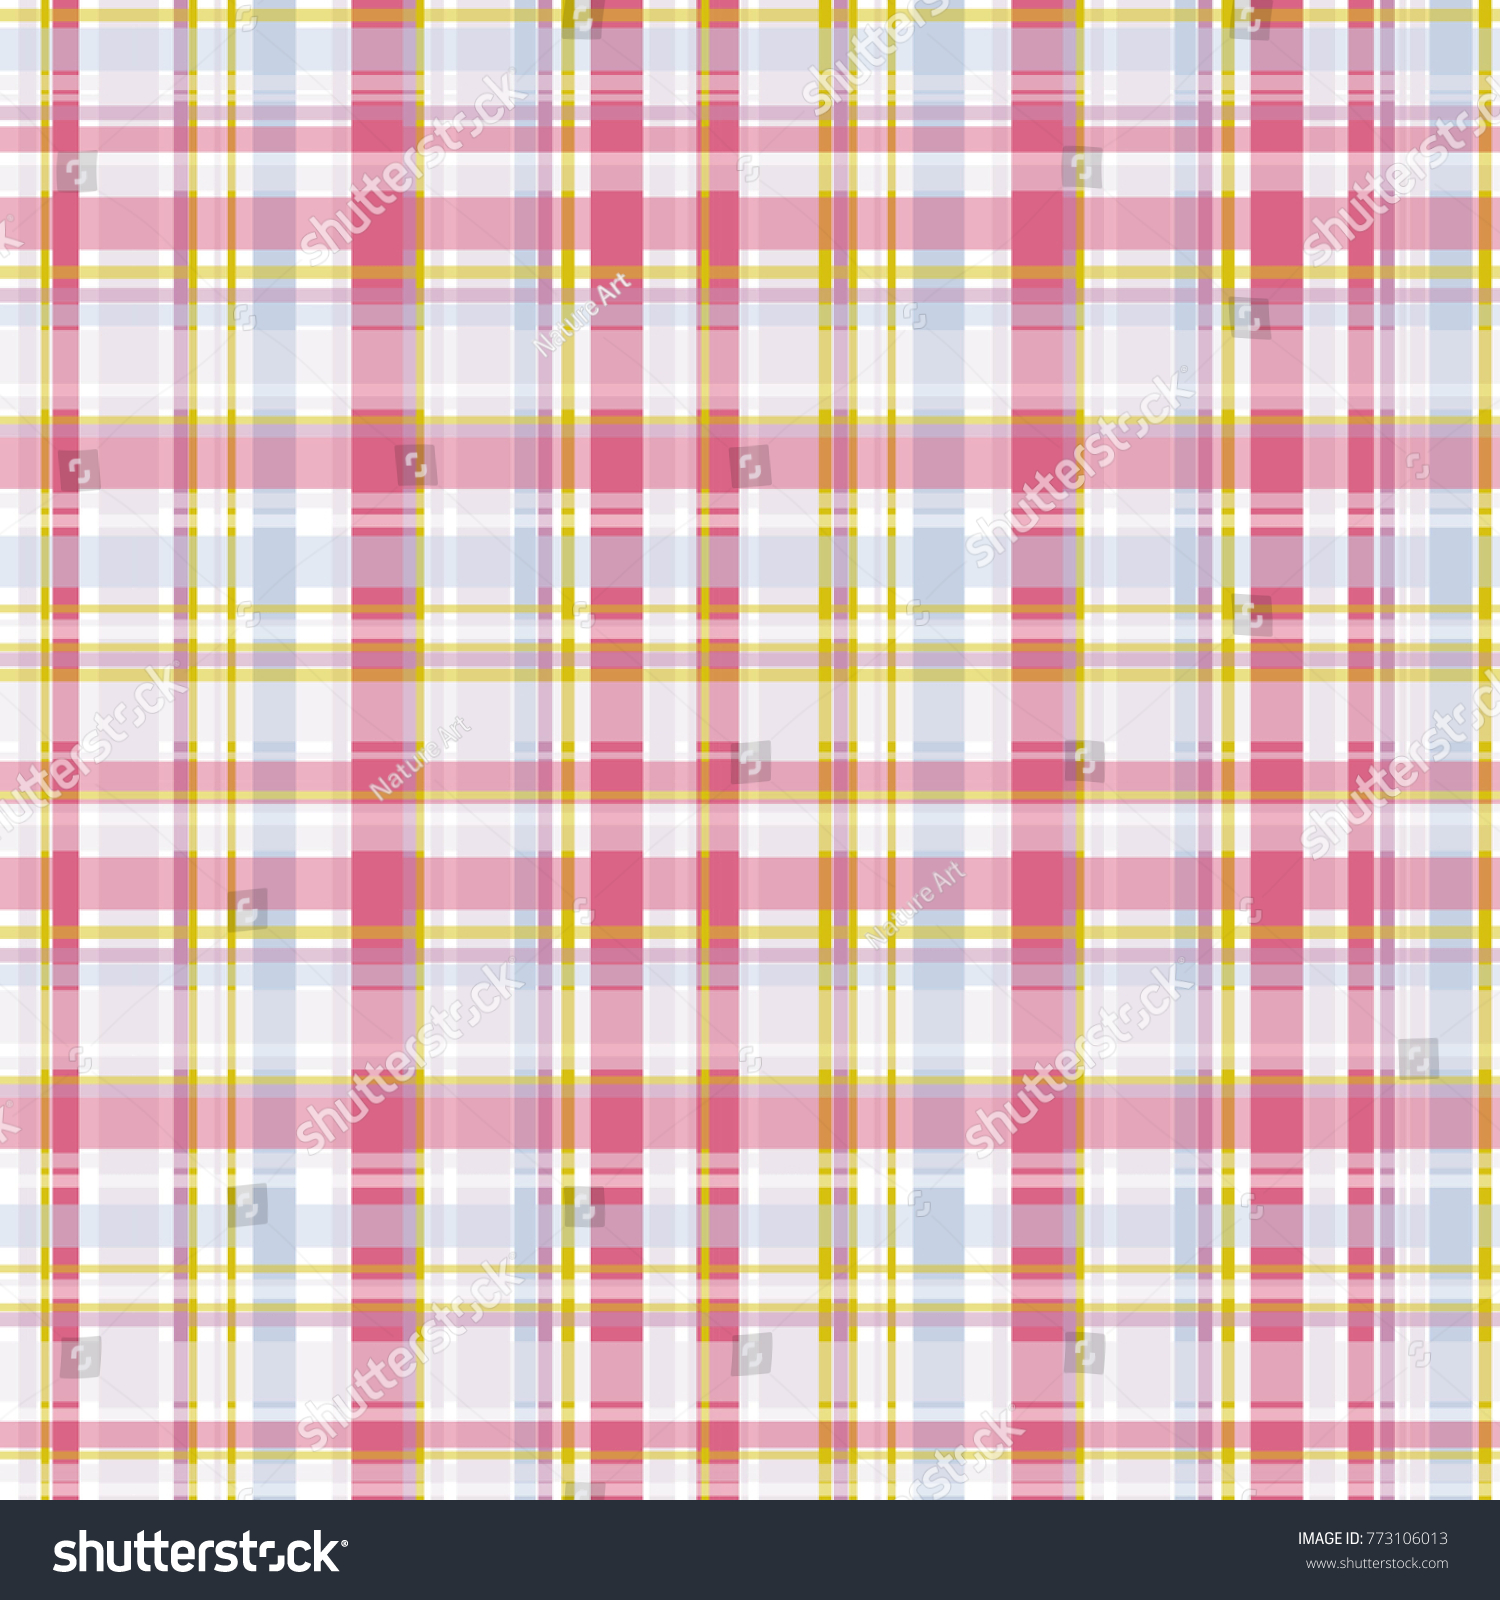 Seamless Plaid Pattern Checkered Fabric Texture Stock Vector ...